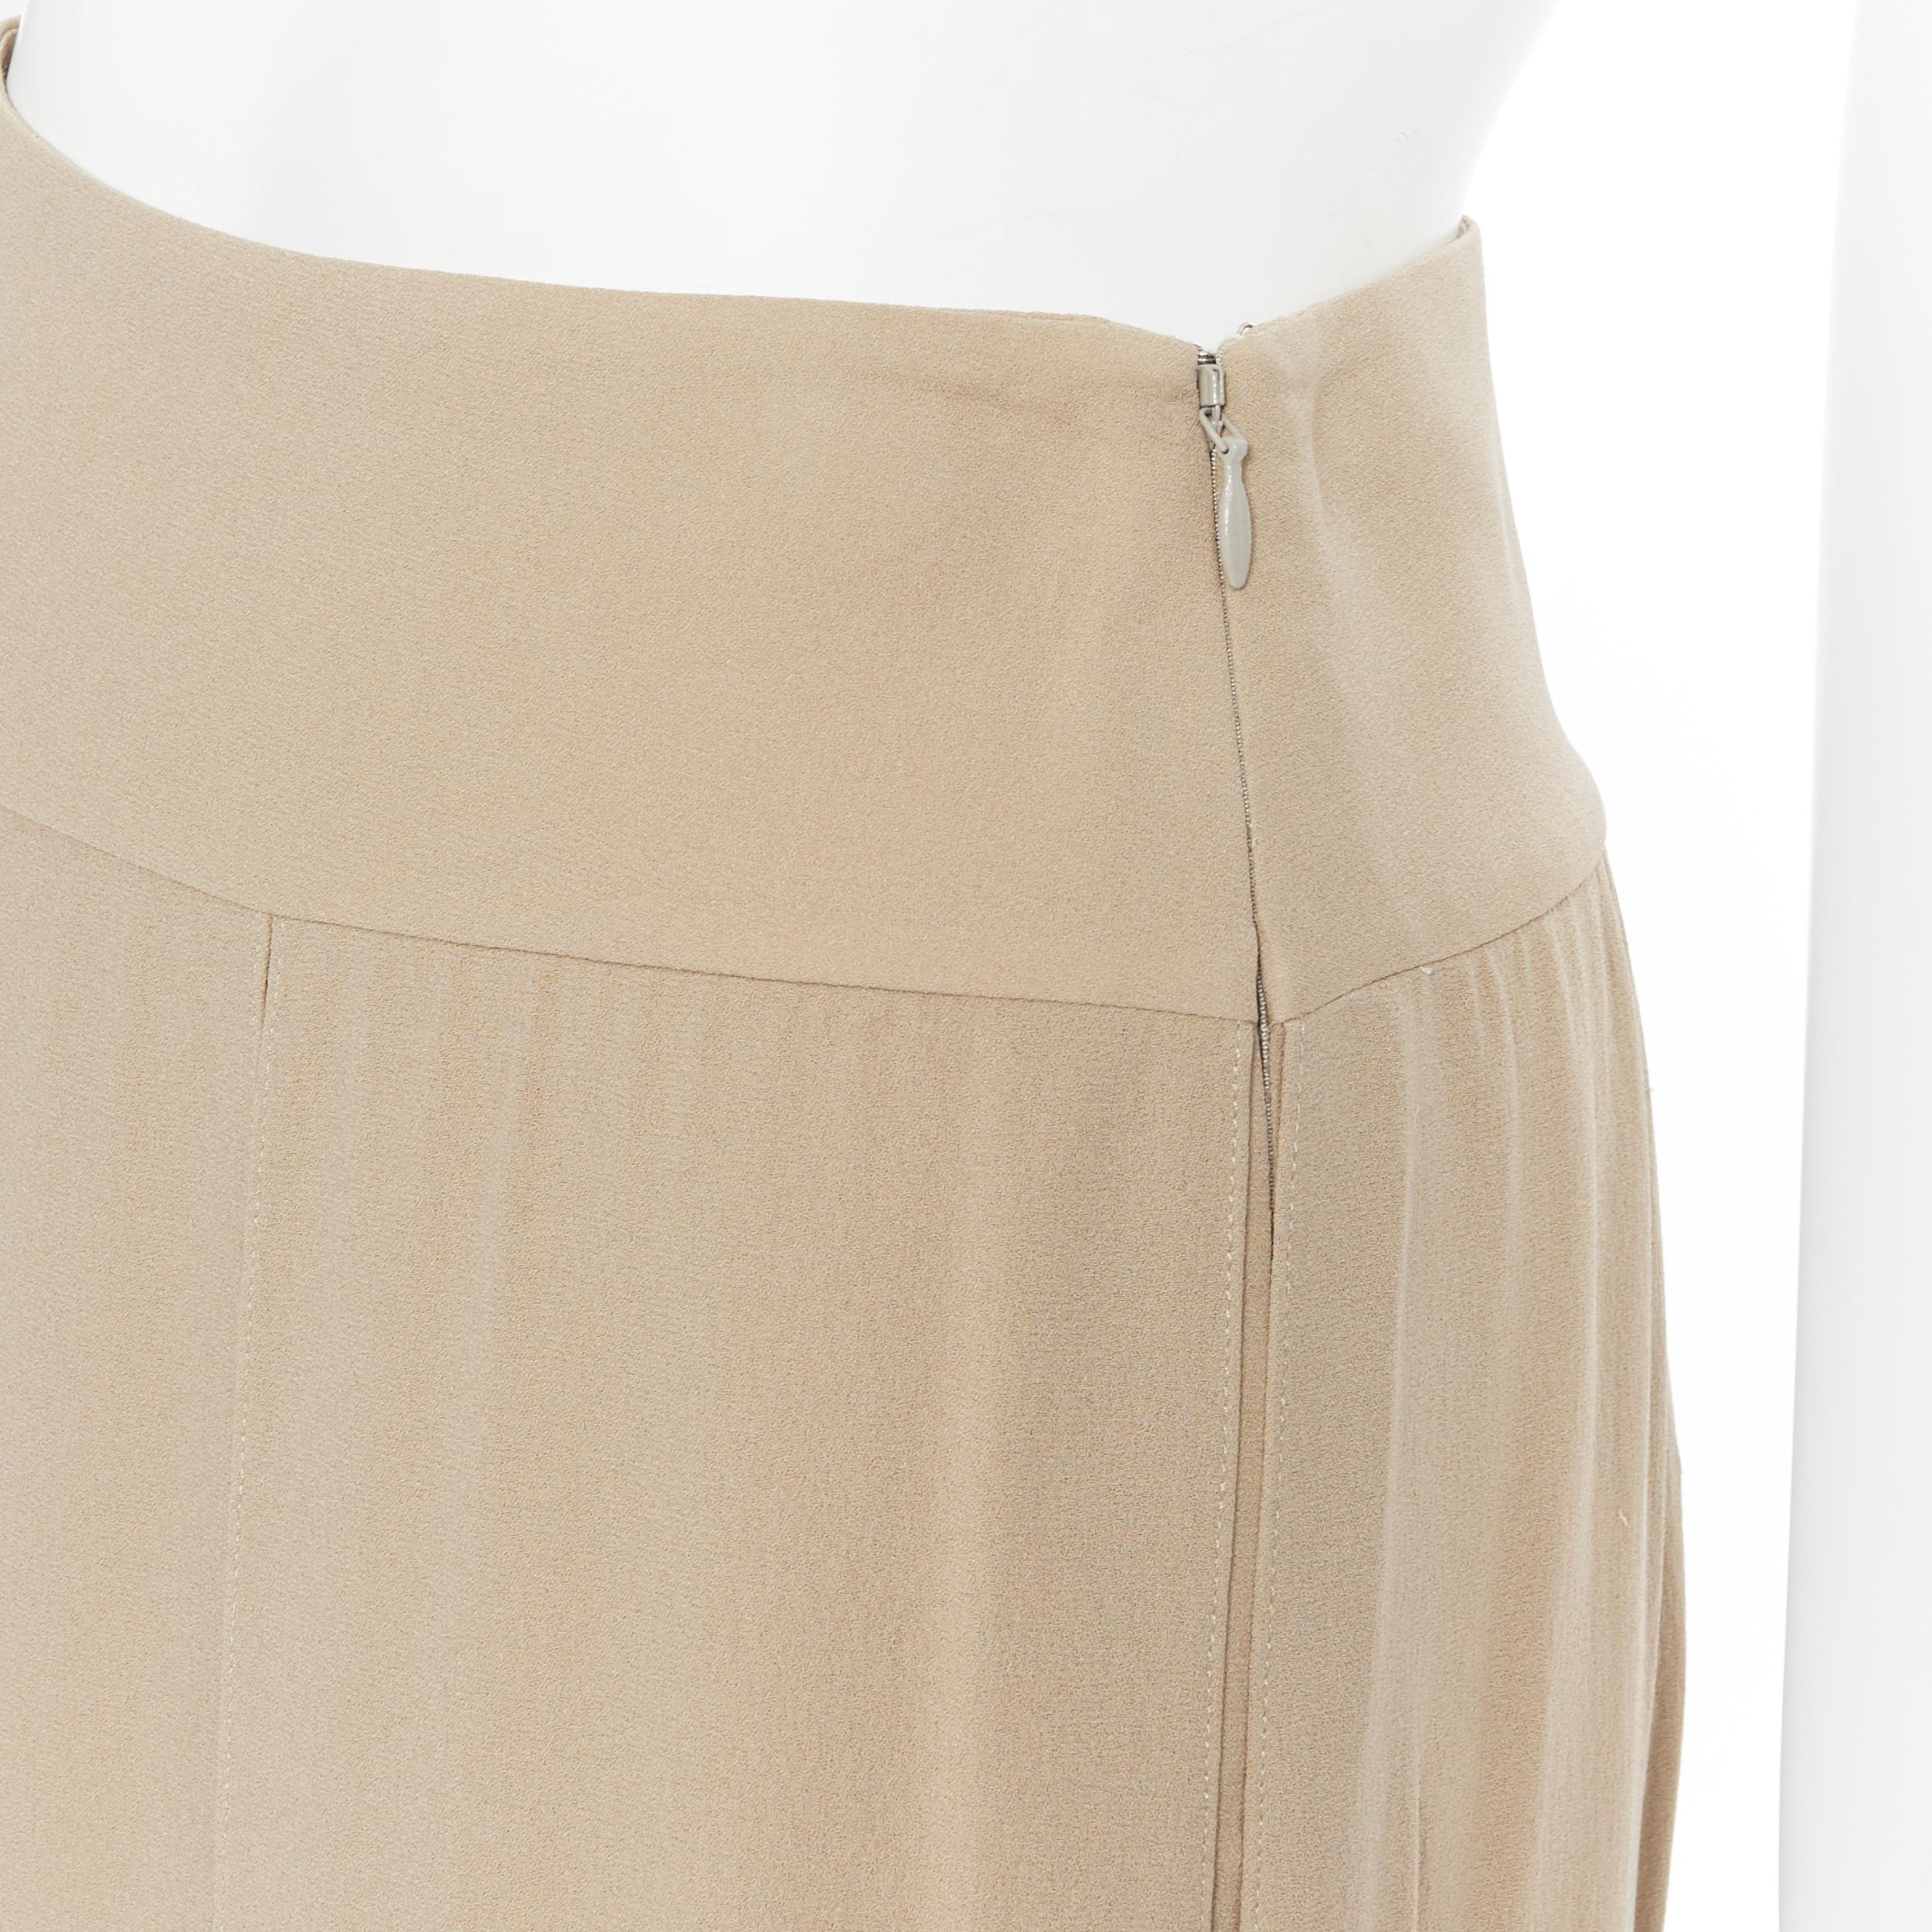 Women's MICHAEL KORS COLLECTION 100% silk camel beige pleated layered skirt US0 24